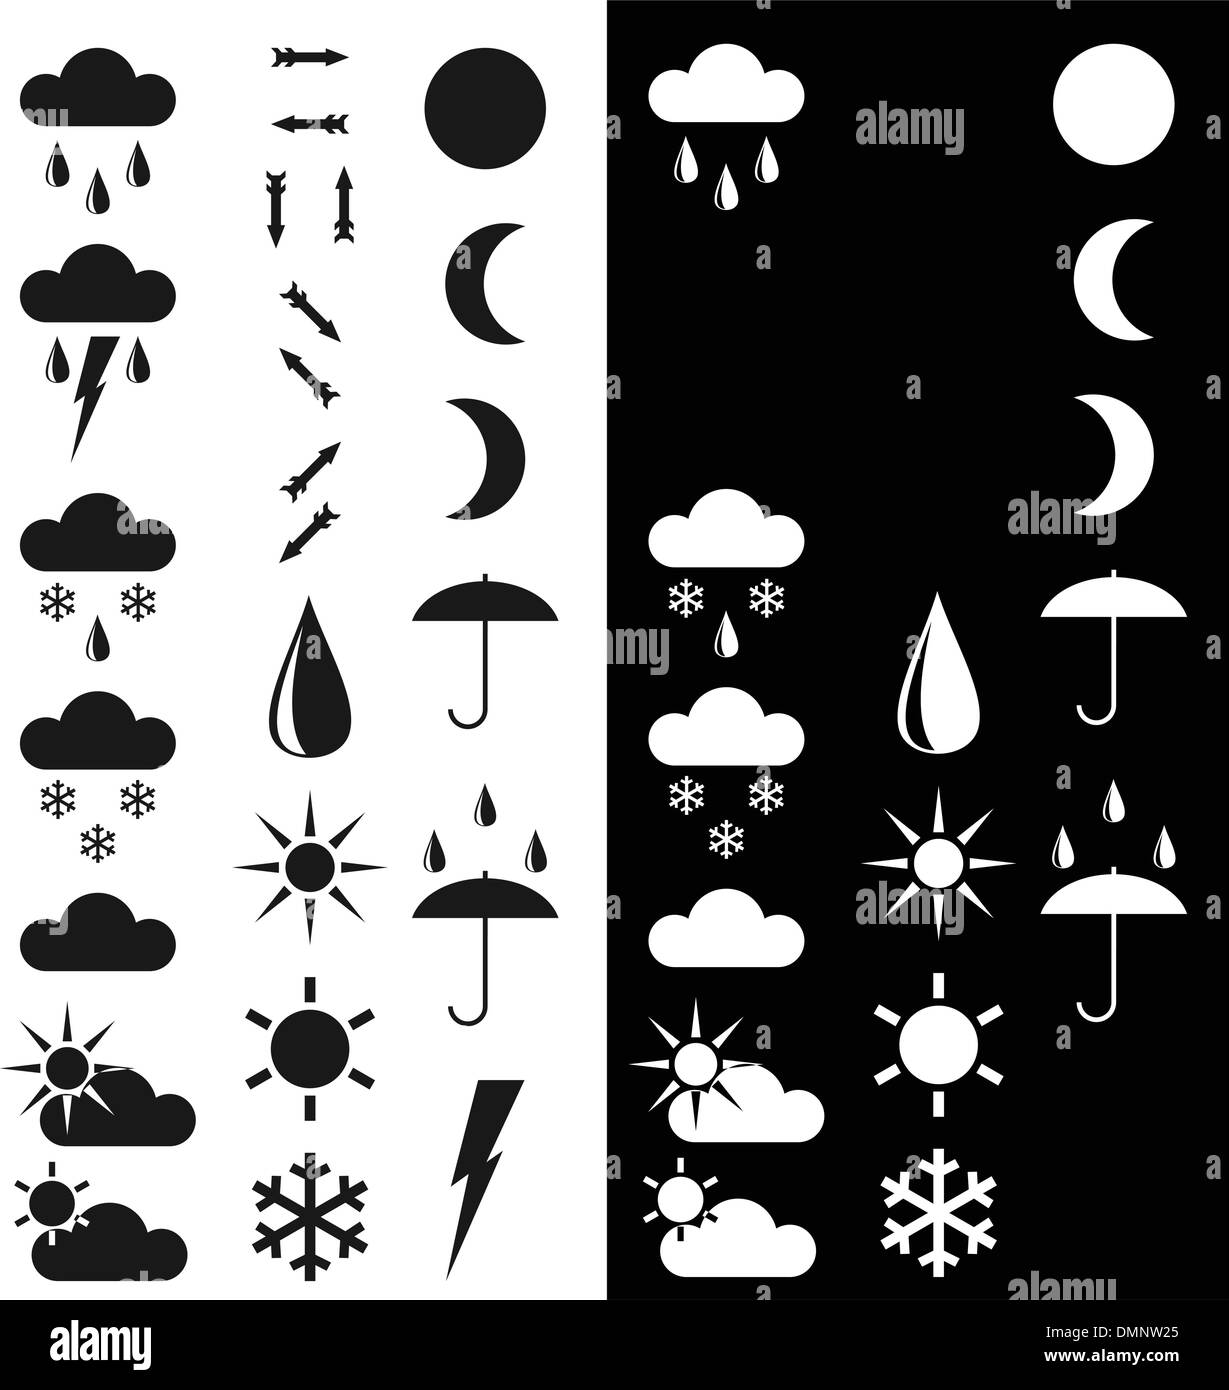 Symbols for the indication of weather. Stock Vector